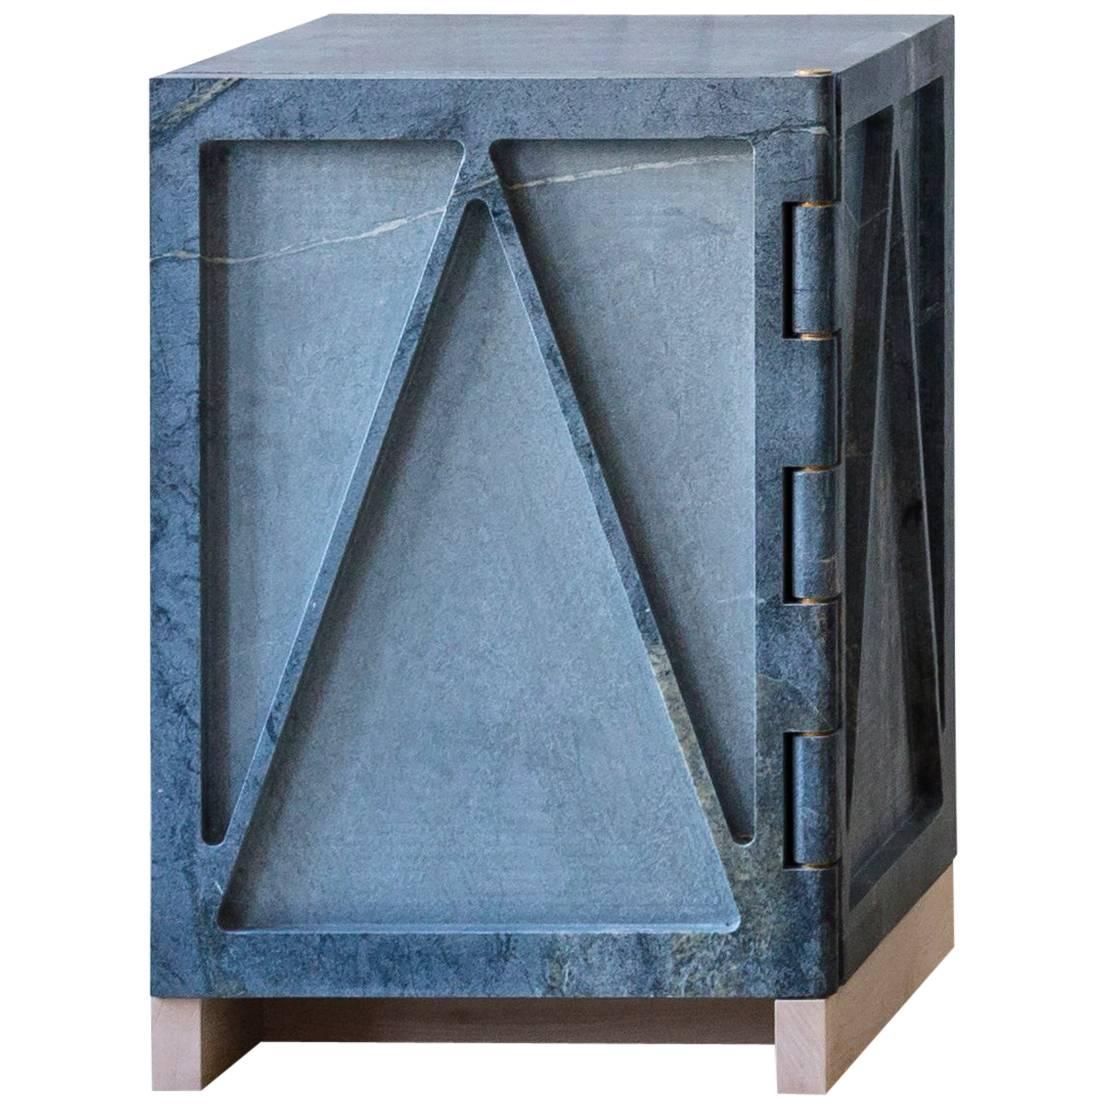 Limited Edition Single Door Relief Stone Cabinet in Soapstone by Fort Standard